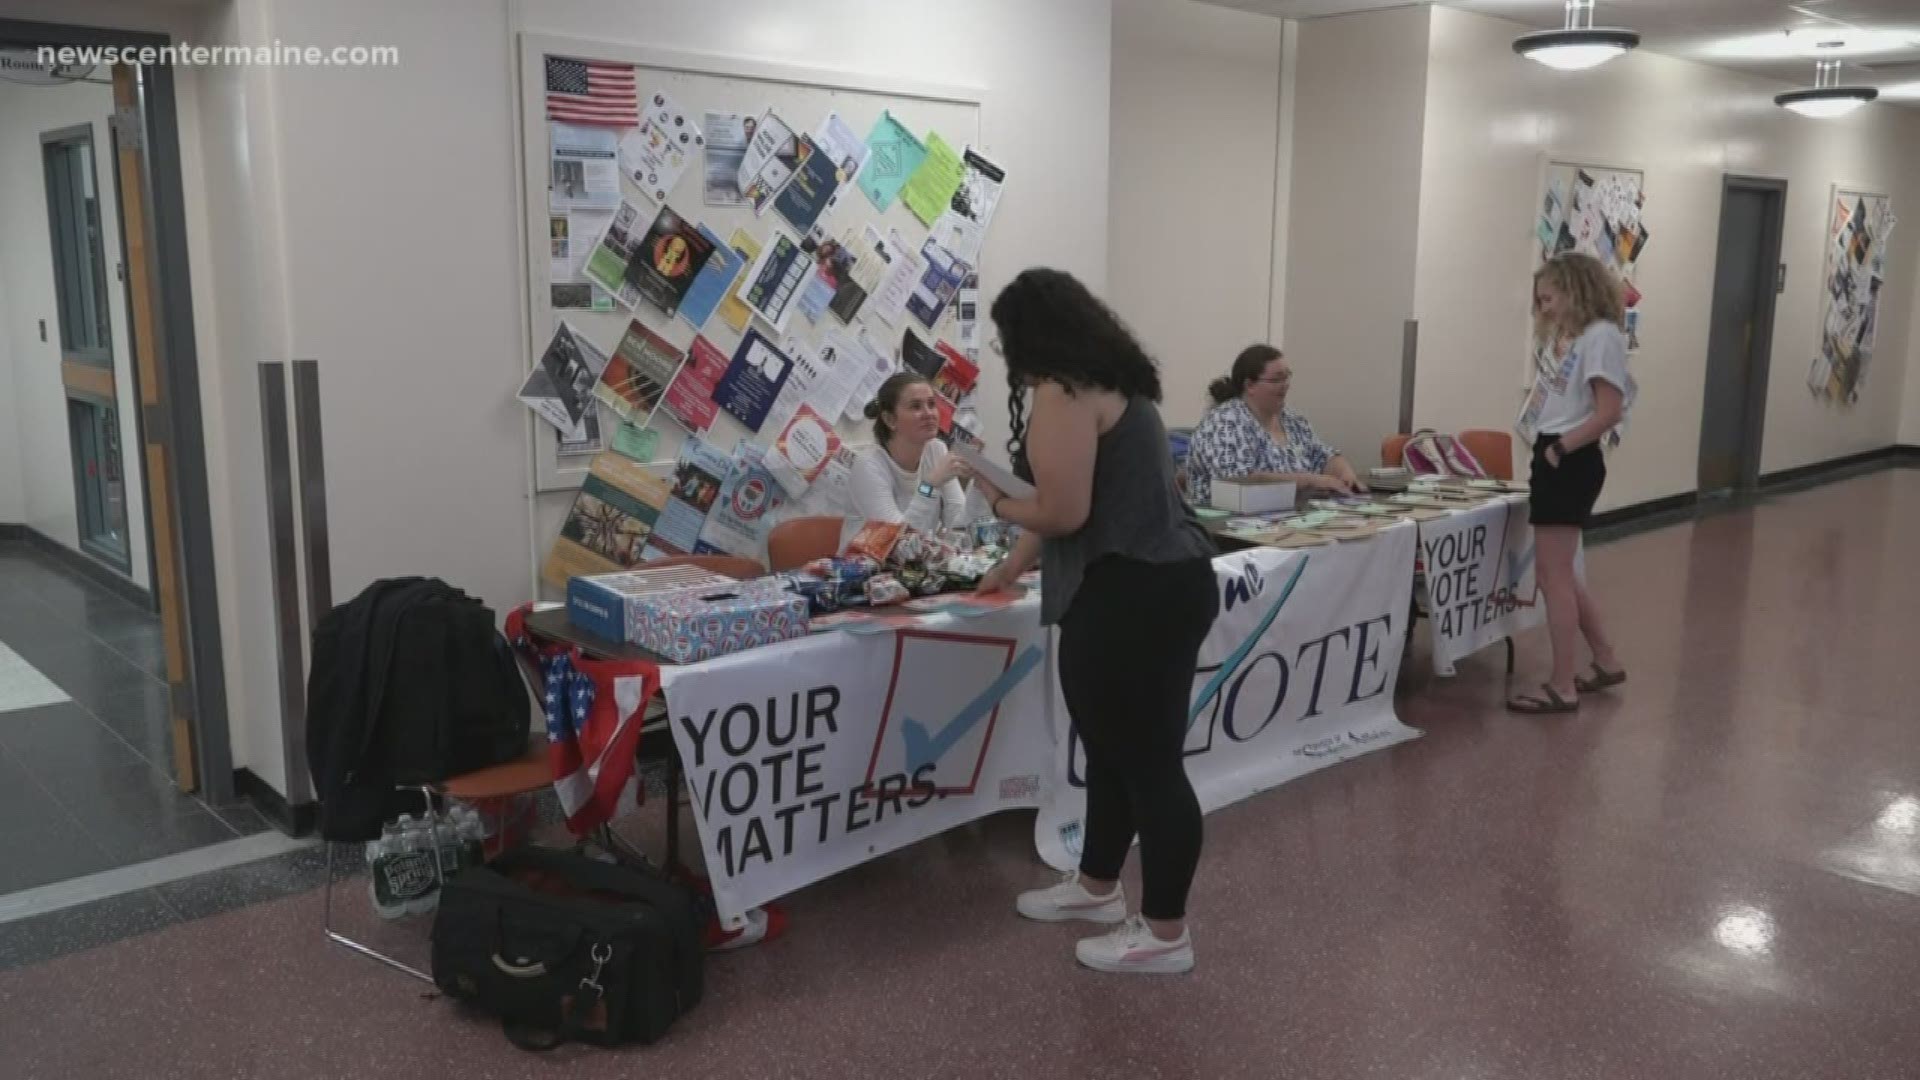 A group from Washington D.C. is trying to get more Mainers to vote by sending them a voter registration application in the mail.